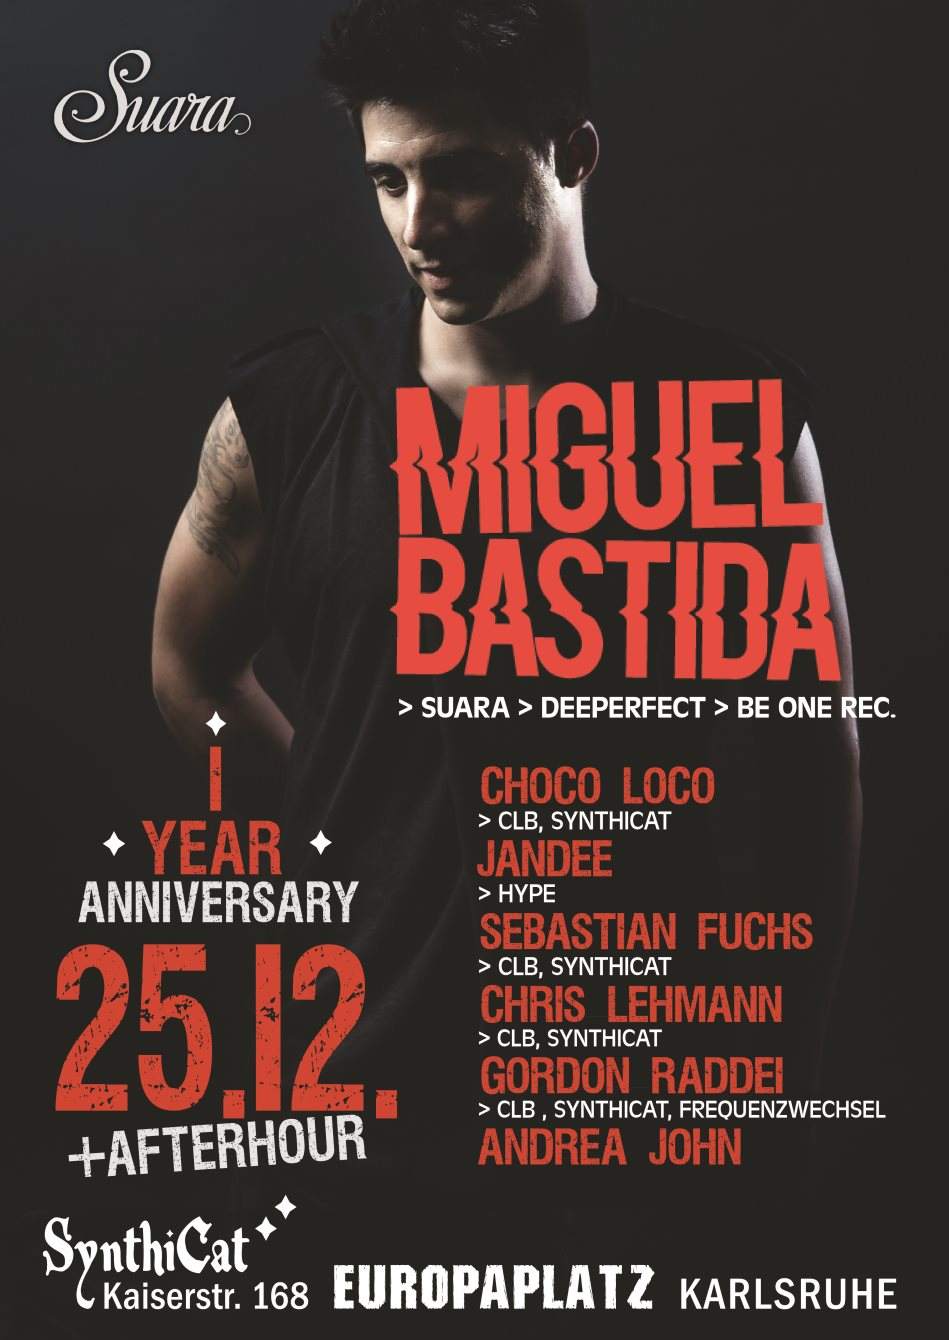 1 Years Anniversary of Synthicat with Miguel Bastida (Suara, Deeperfect, Be One Records) - フライヤー裏